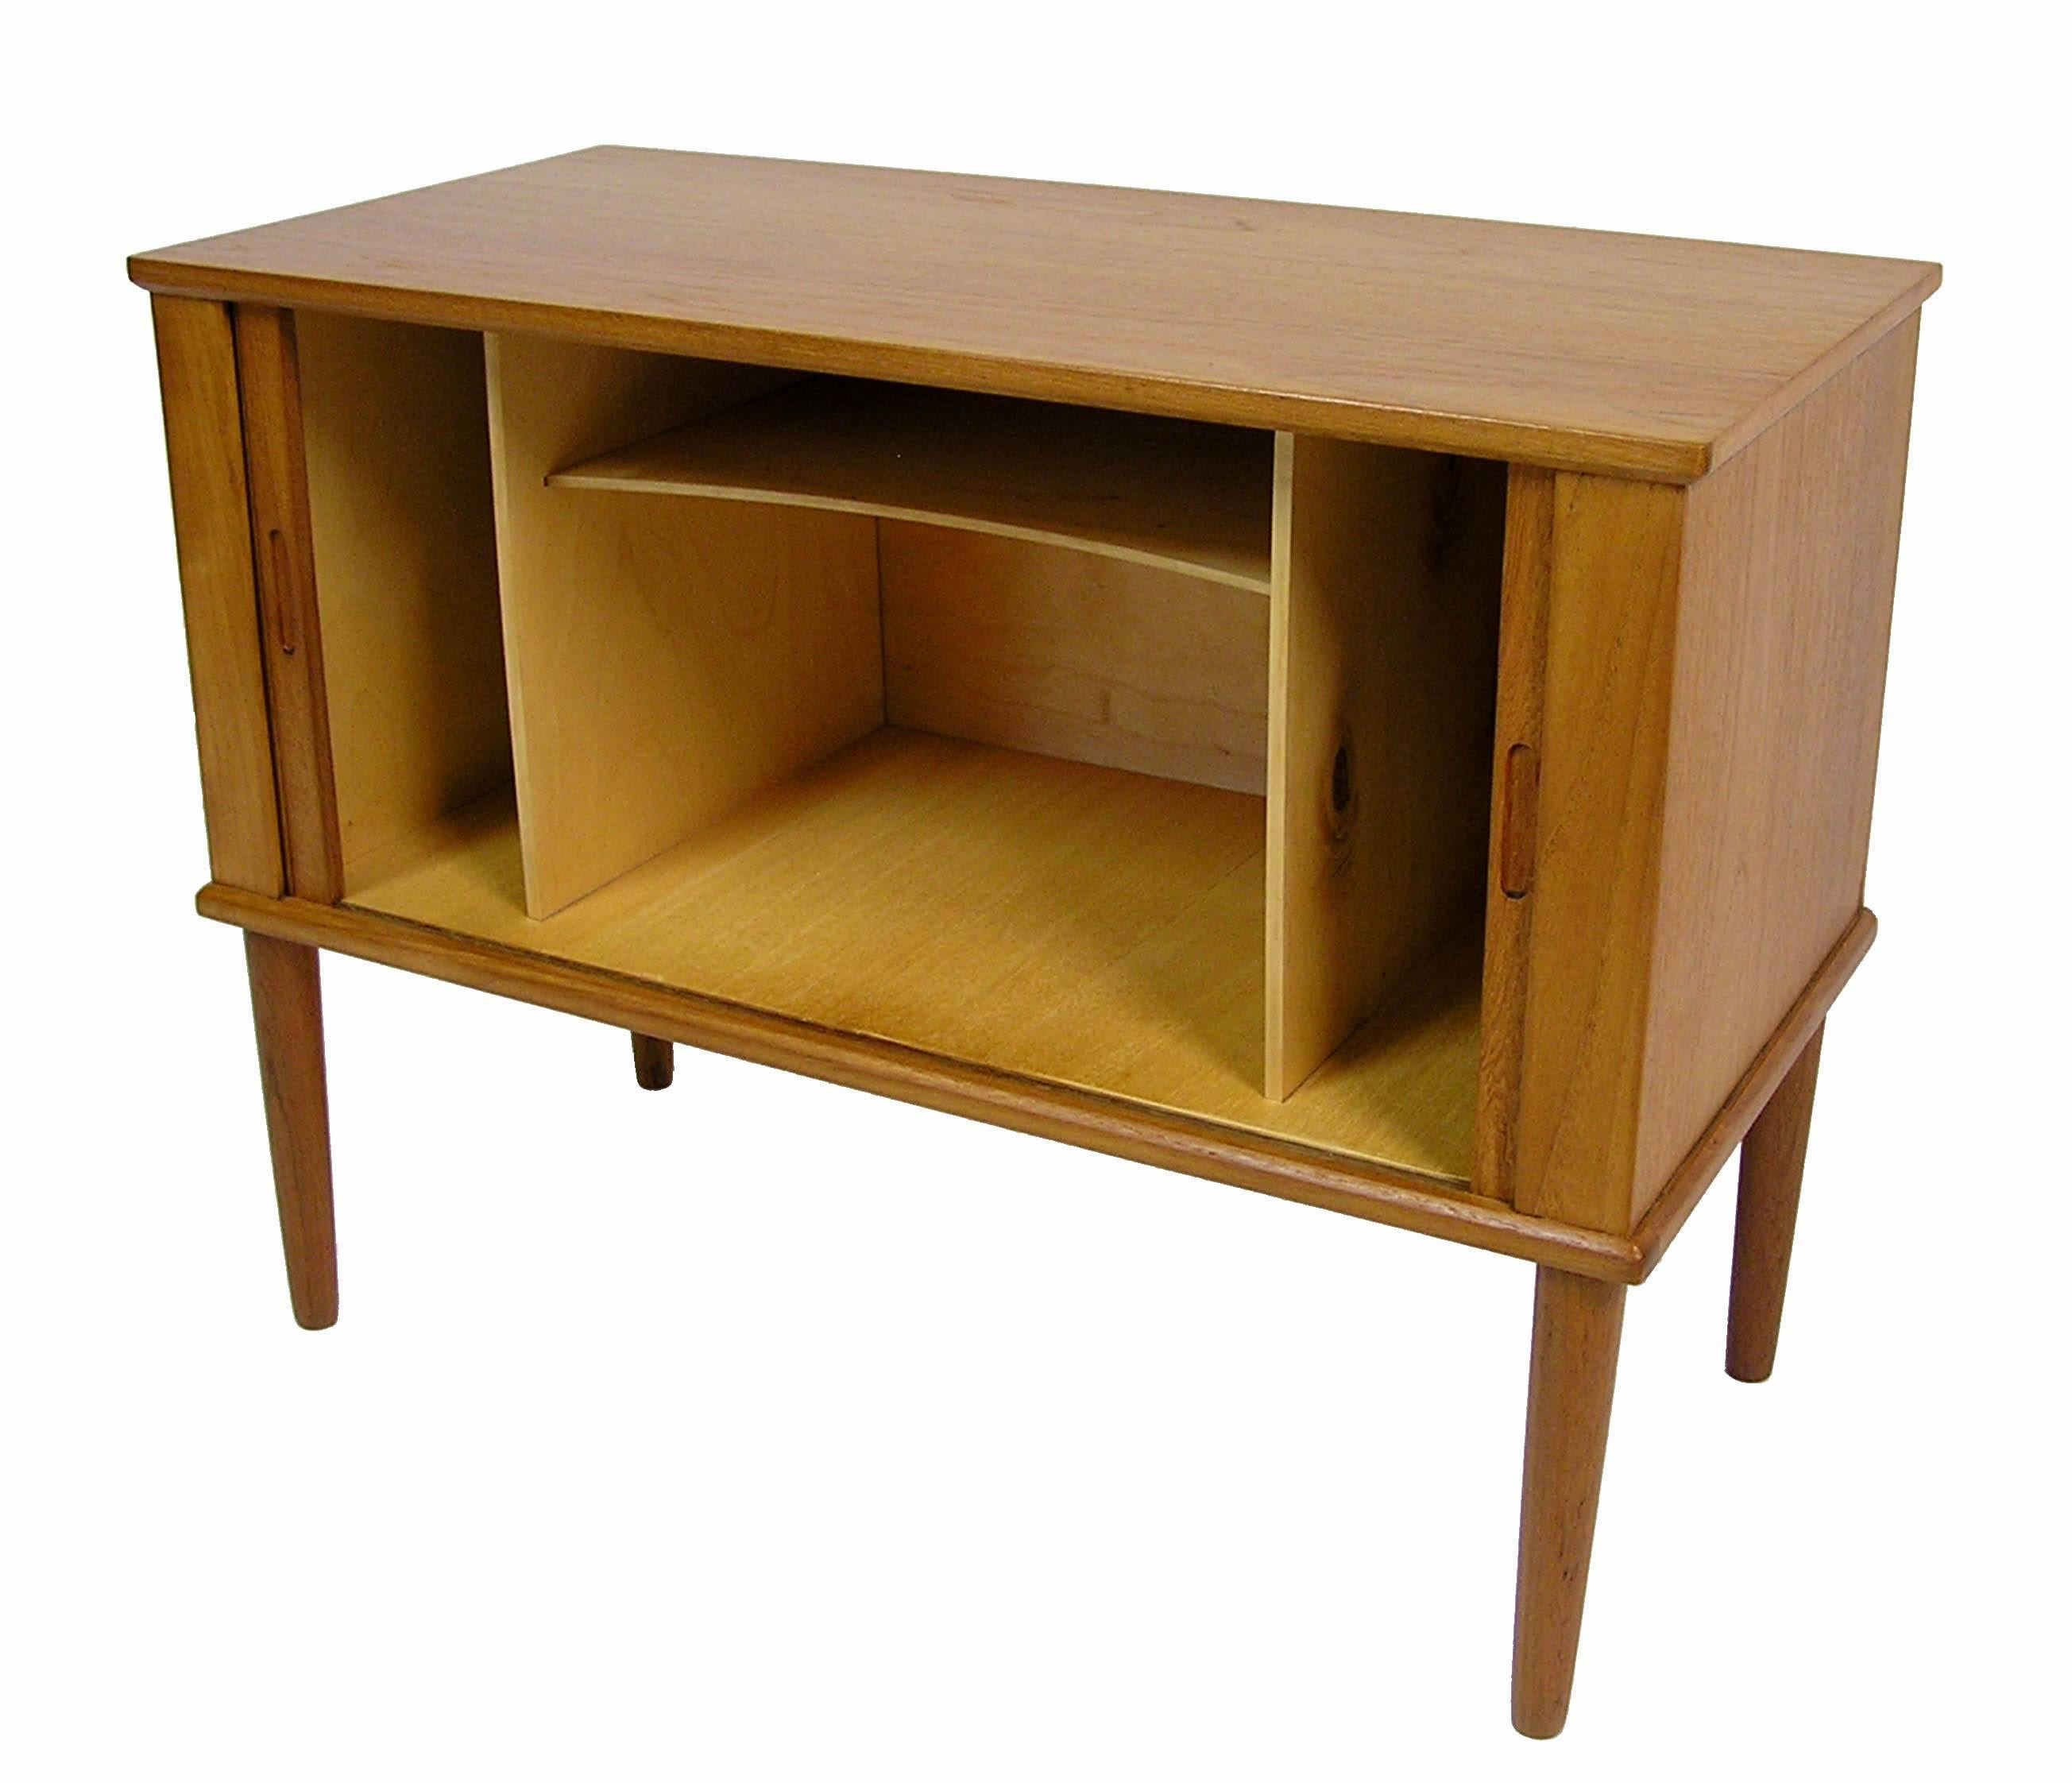 A small teak record cabinet from the 1960s Danish modern era. Similar in design to those by Kai Kristiansen this unique tambour door storage cabinet features a low compact form with tapered conical legs and inset modern era pulls. Inside of the